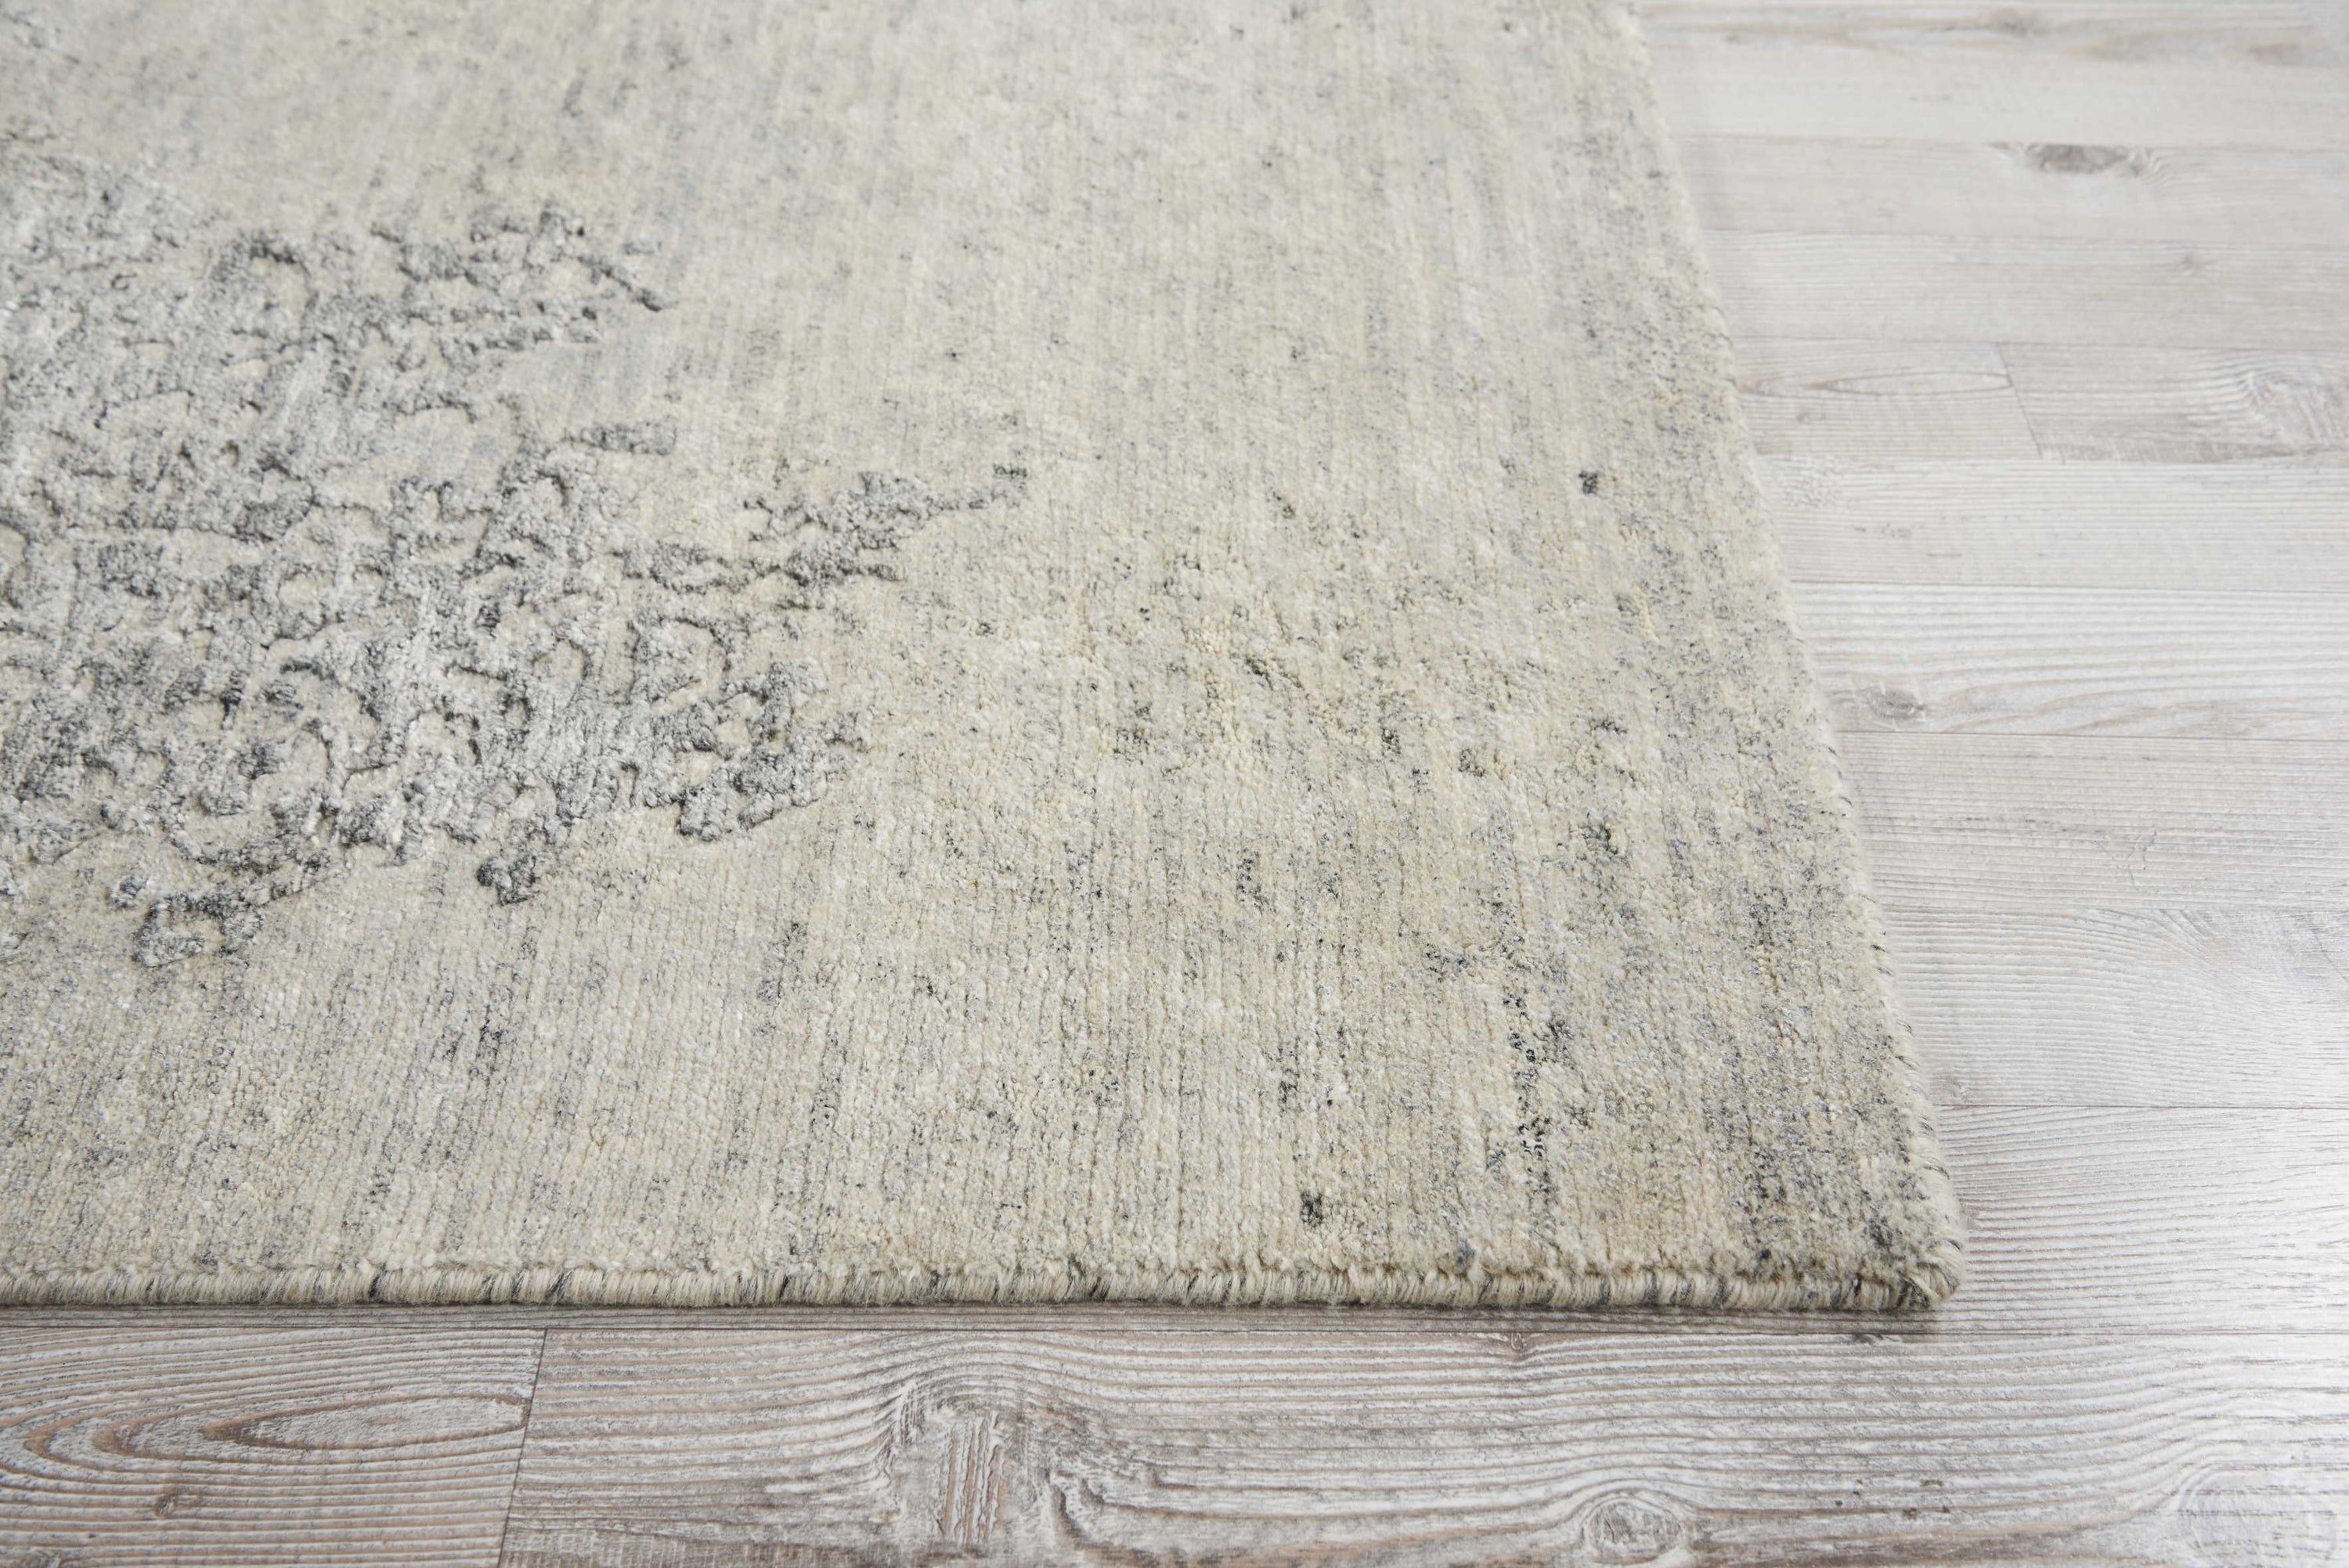 Close-up of a light-colored textured rug on a wooden floor.